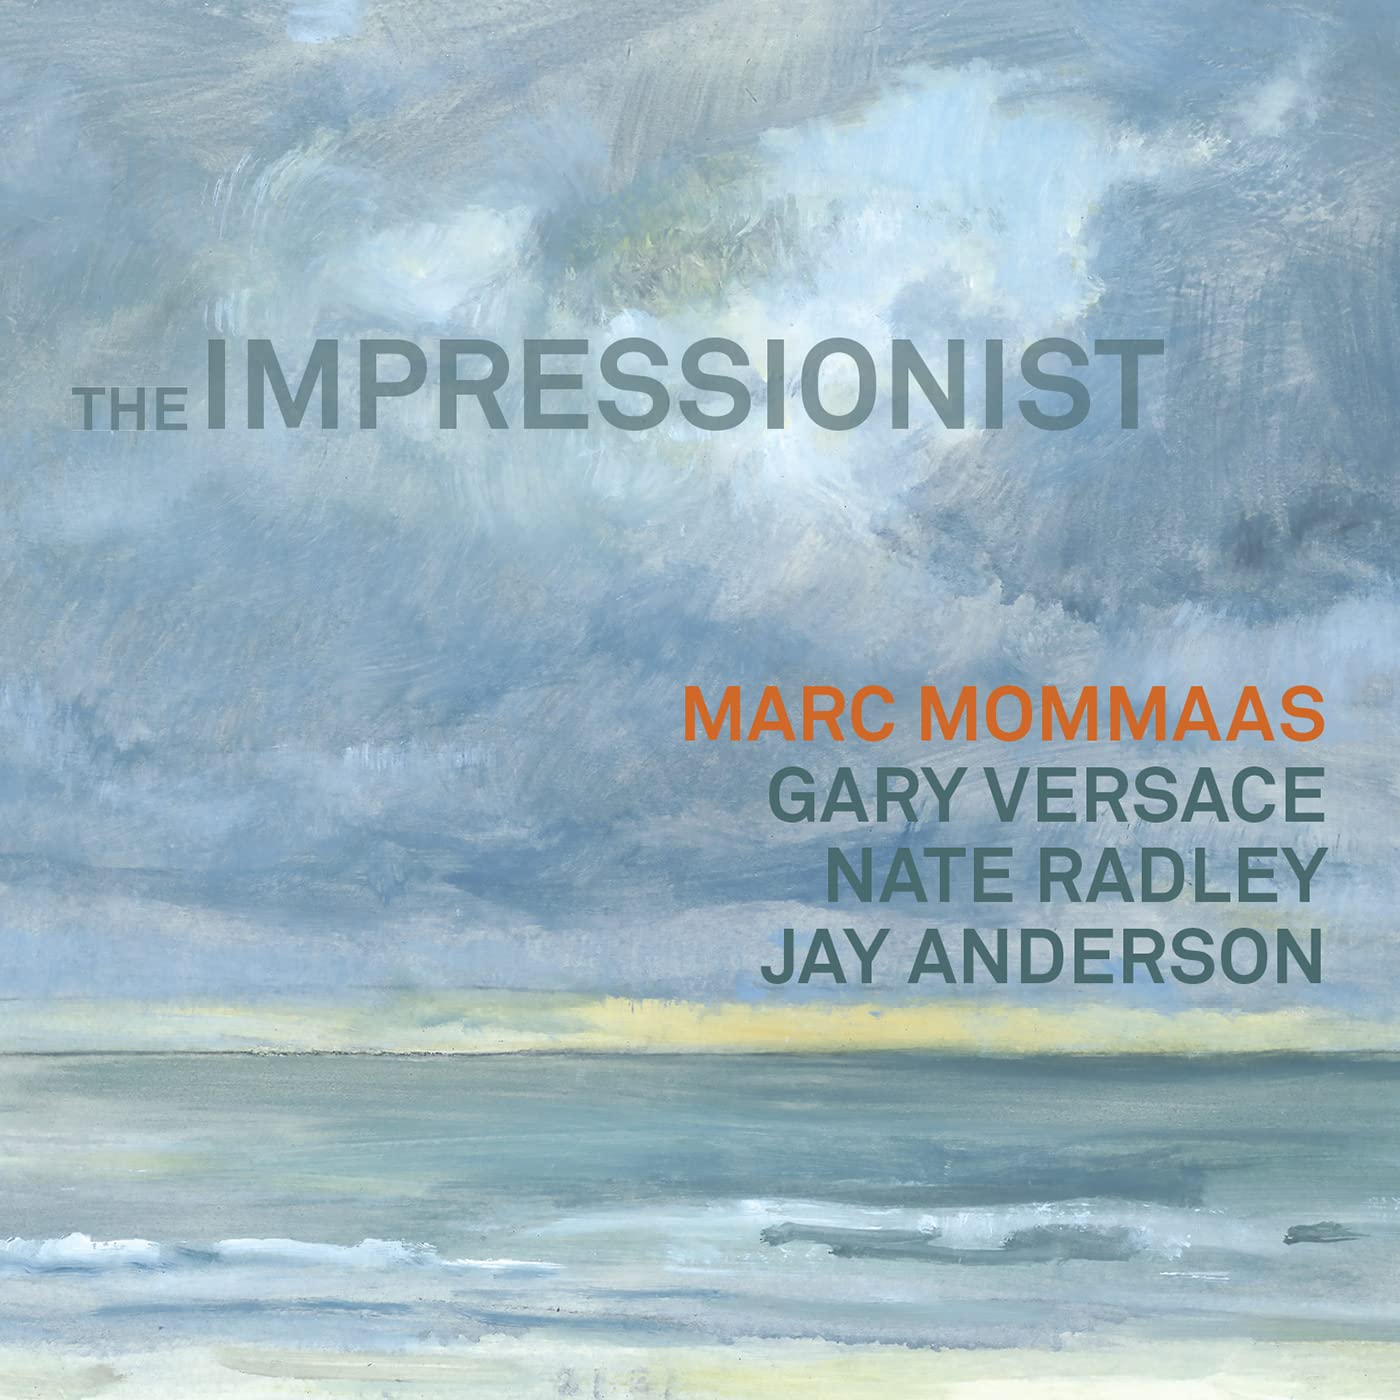 MARC MOMMAAS - The Impressionist cover 